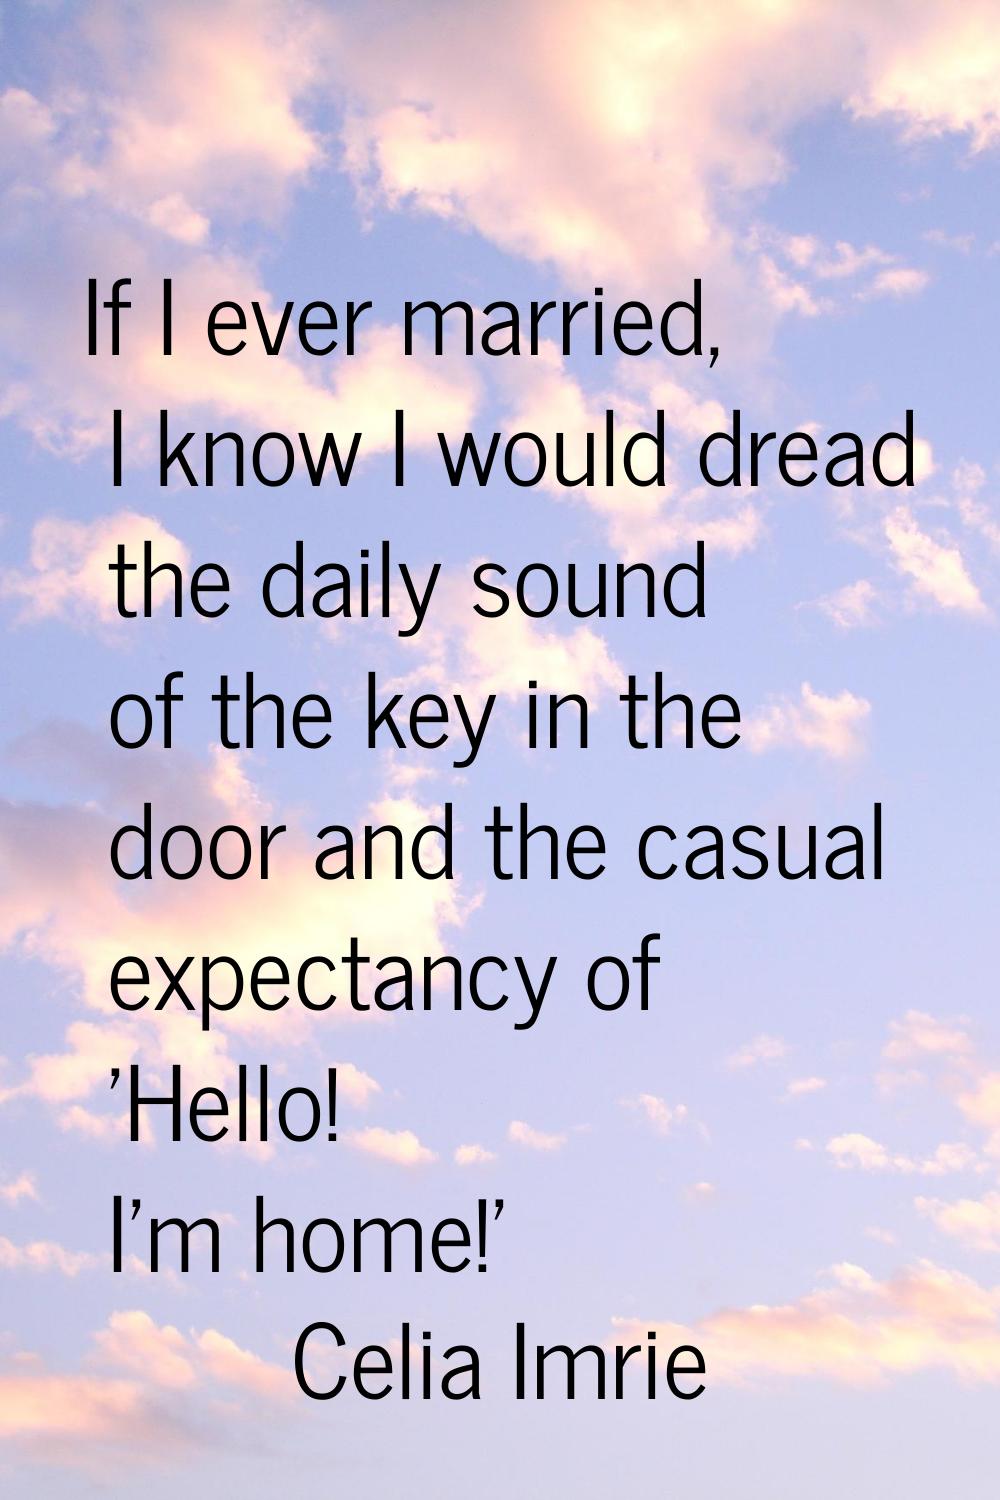 If I ever married, I know I would dread the daily sound of the key in the door and the casual expec